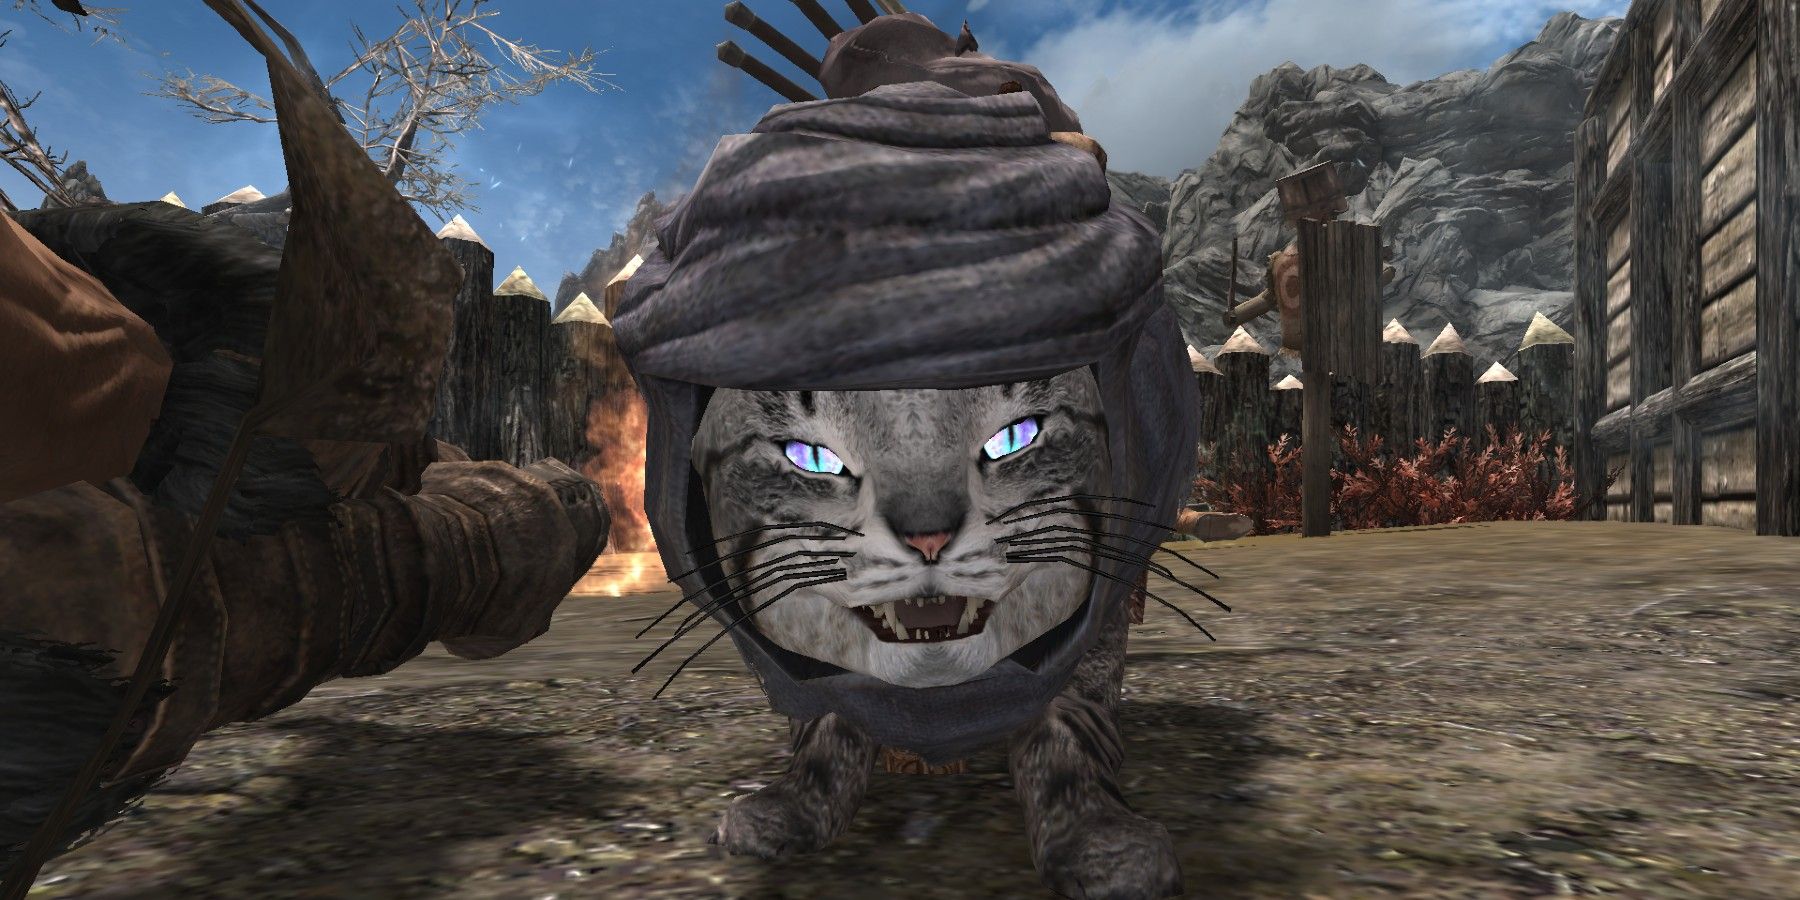 Funny Skyrim Mod Replaces Courier With an Alfiq Cat